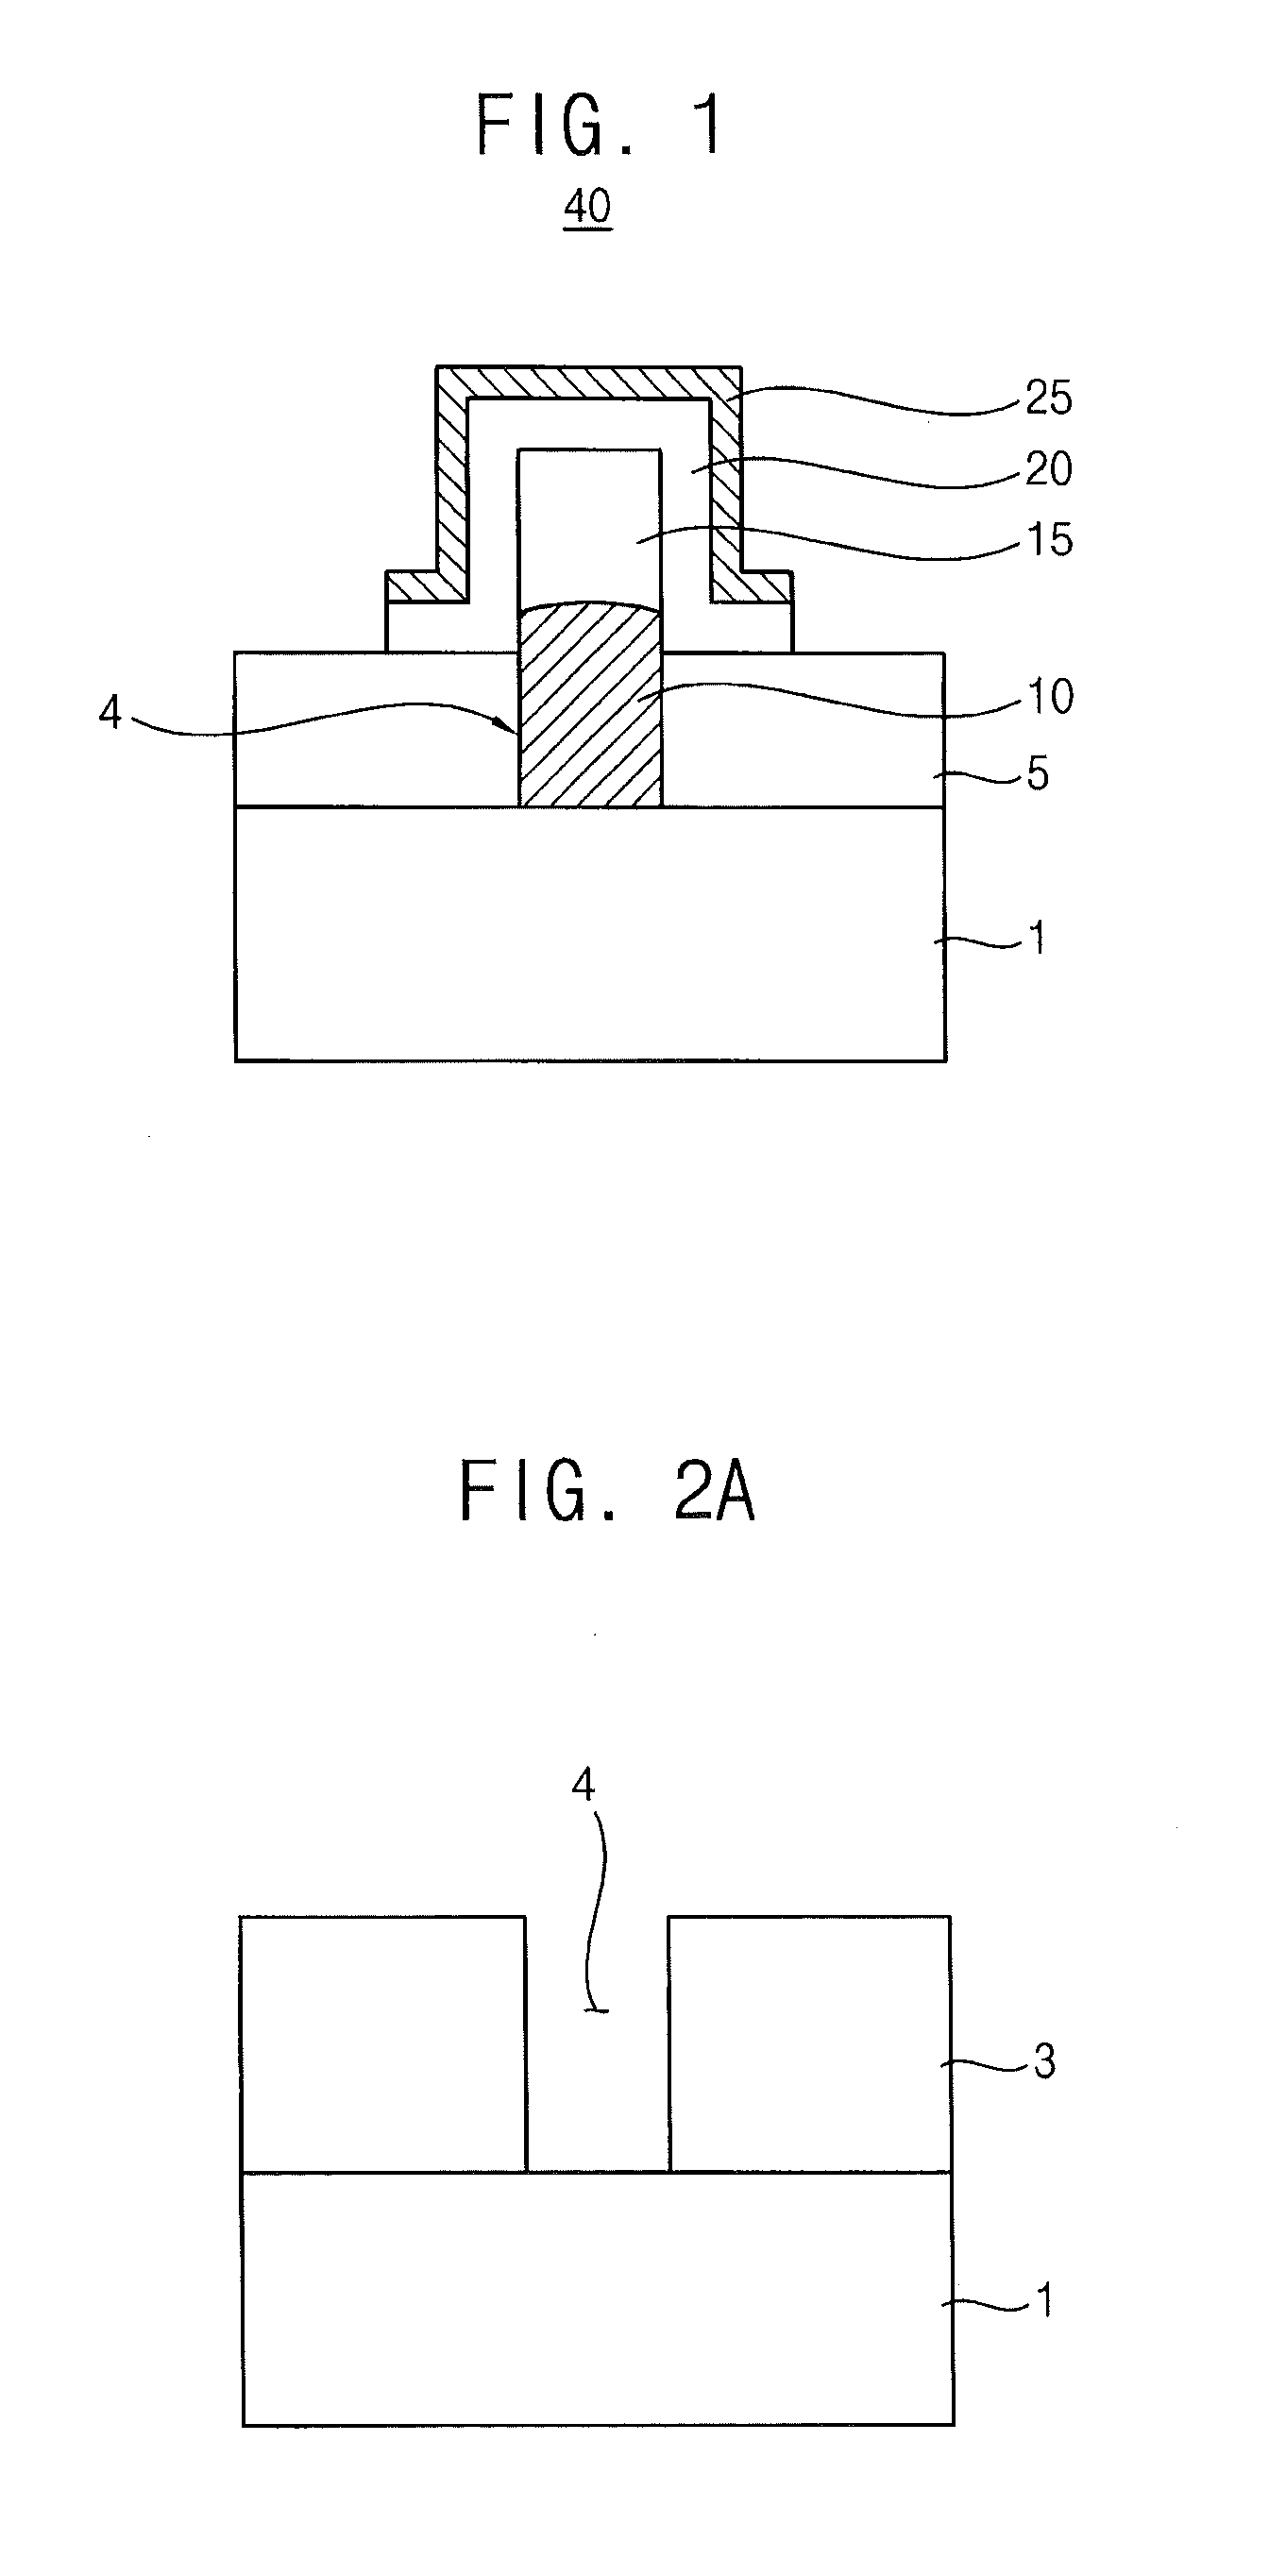 Capacitor having an electrode structure, method of manufacturing a capacitor having an electrode structure and semiconductor device having an electrode structure